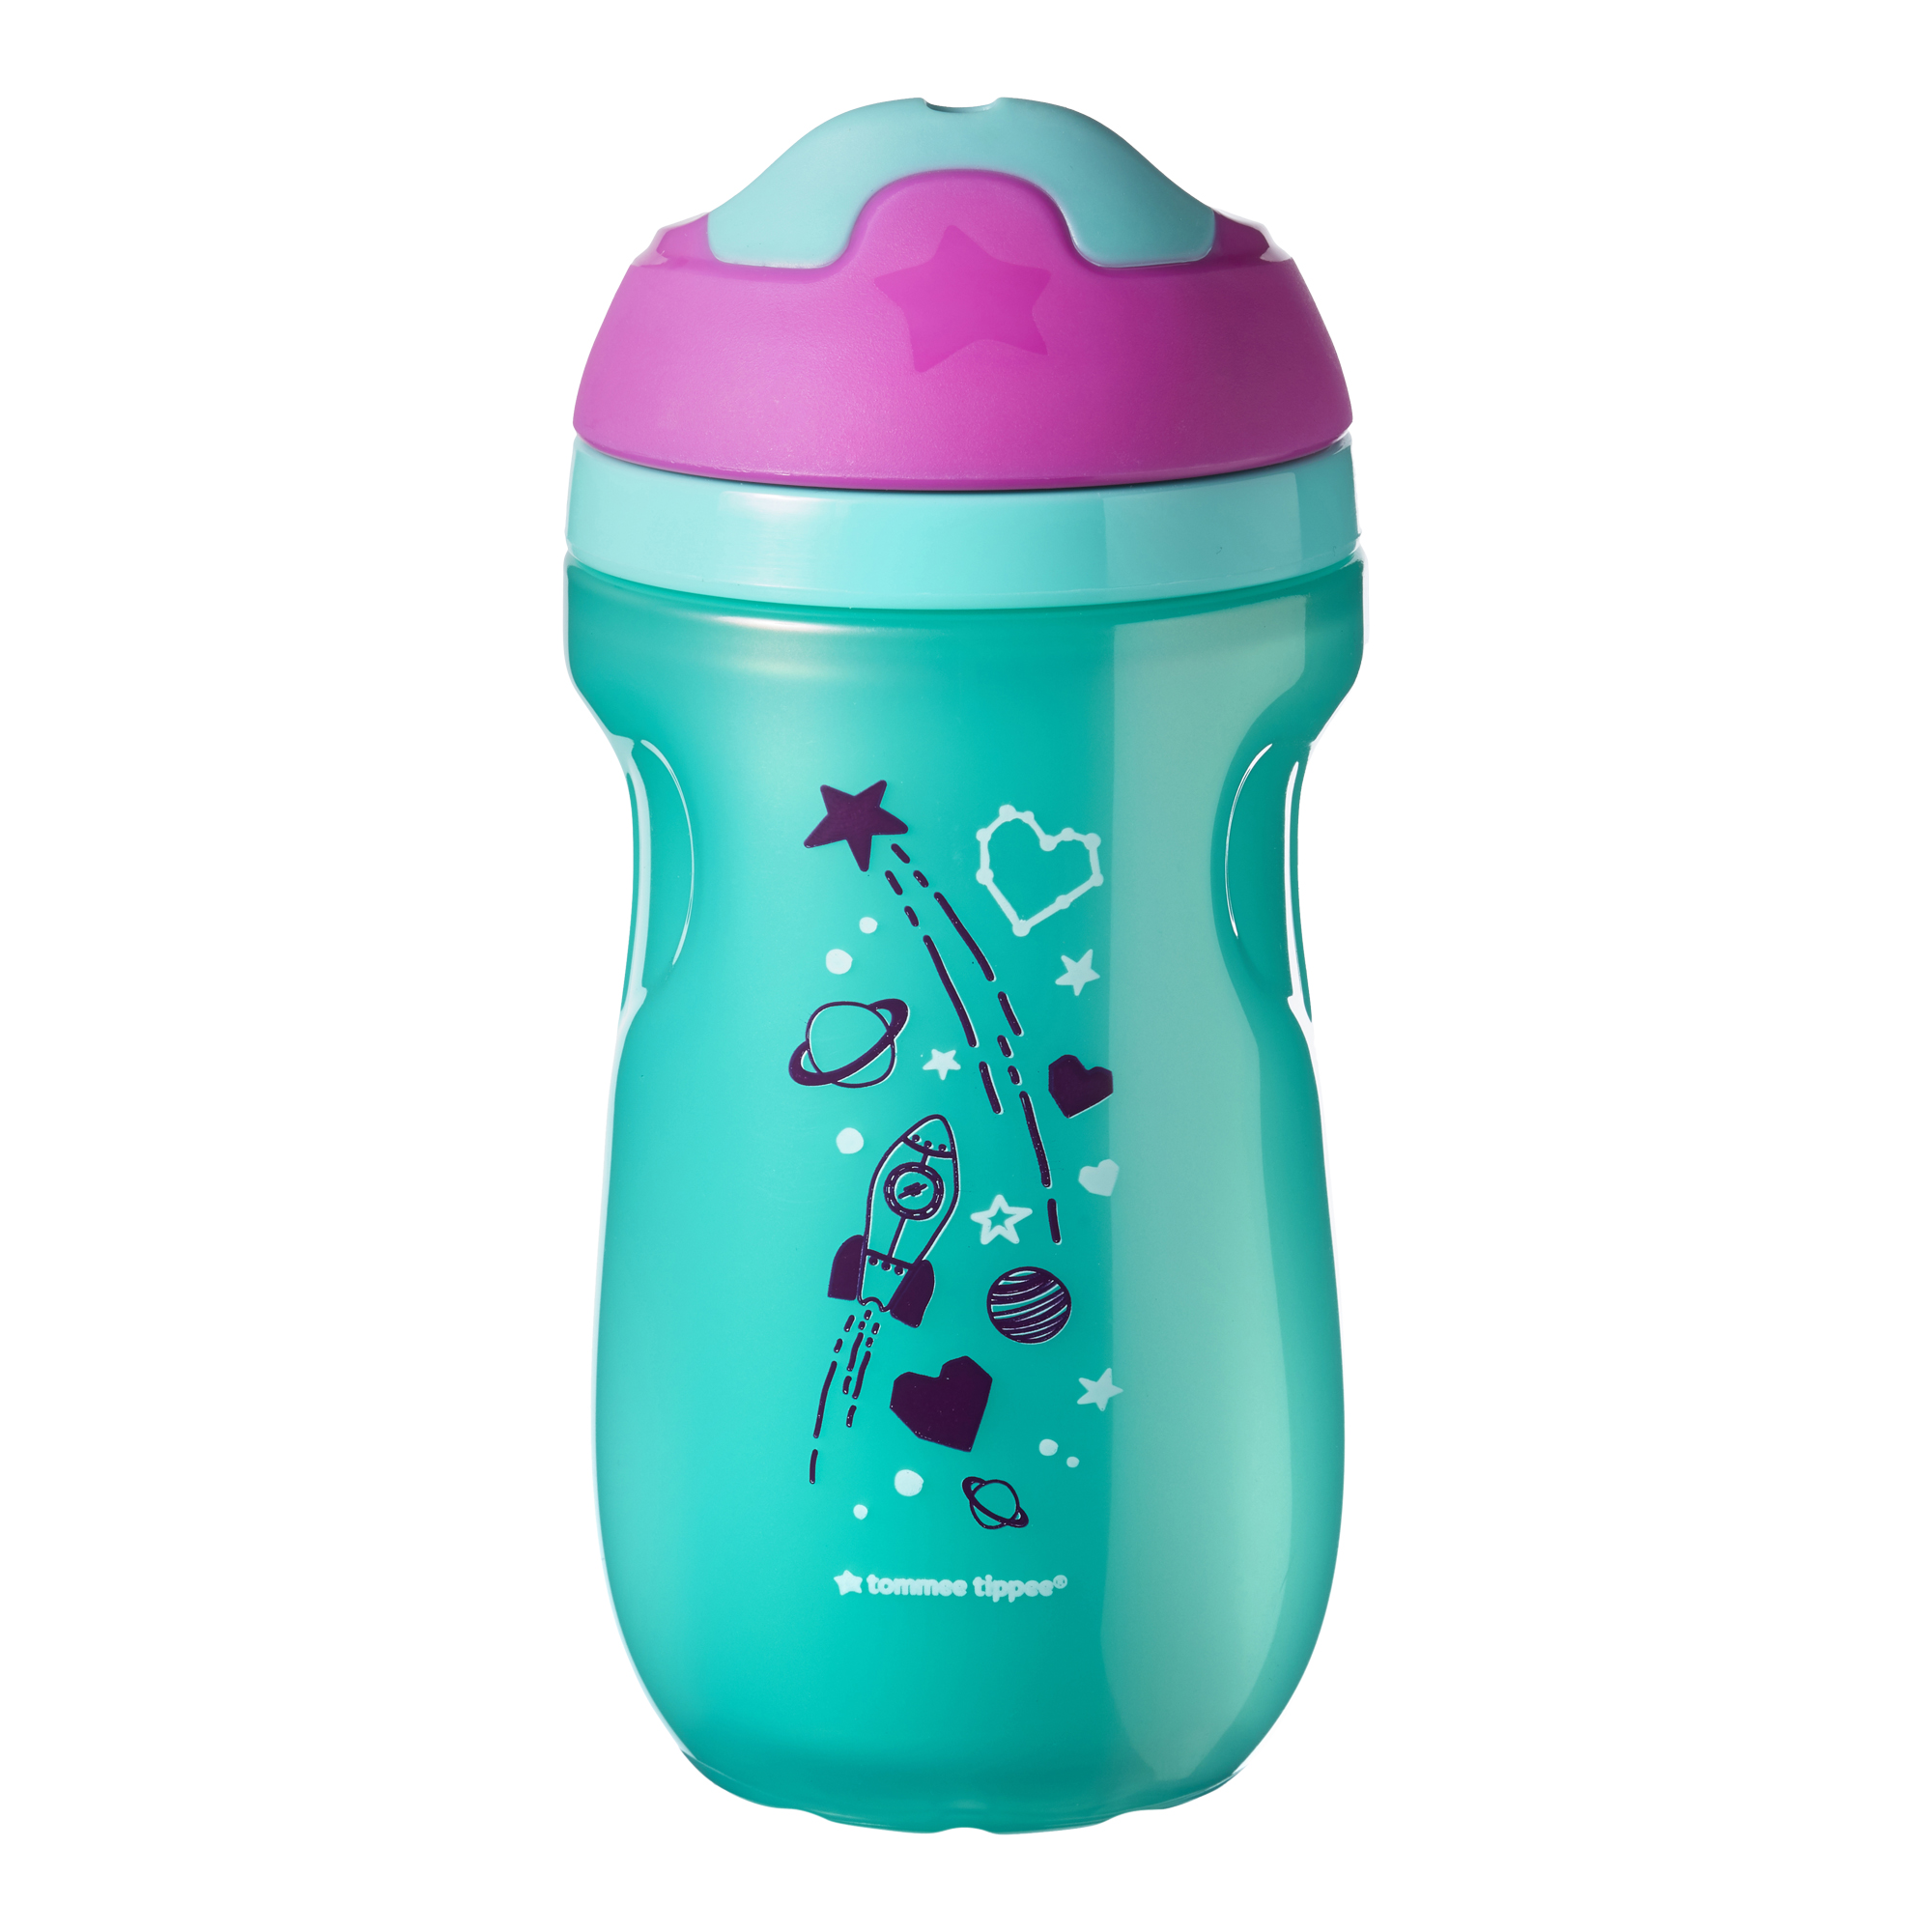 Cana Sippee Izoterma, ONL  Tommee Tippee, 260 ml x 1 buc, 12luni+,  Turquoise image 2